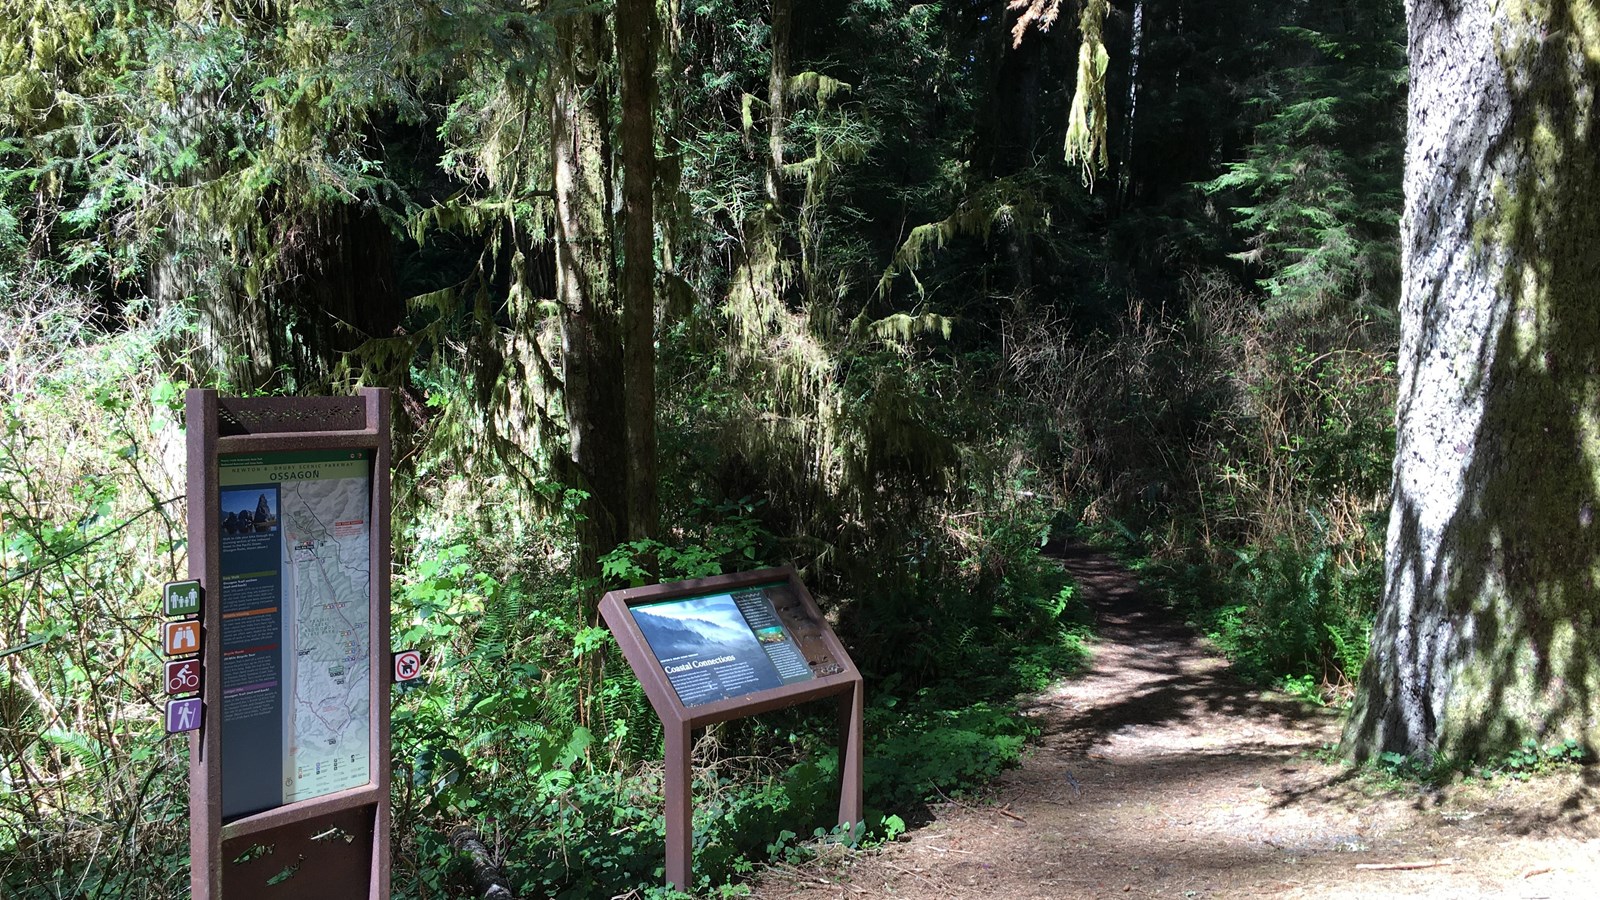 Two informational signs at the start of a trail. Redwoods line the side of the trail.